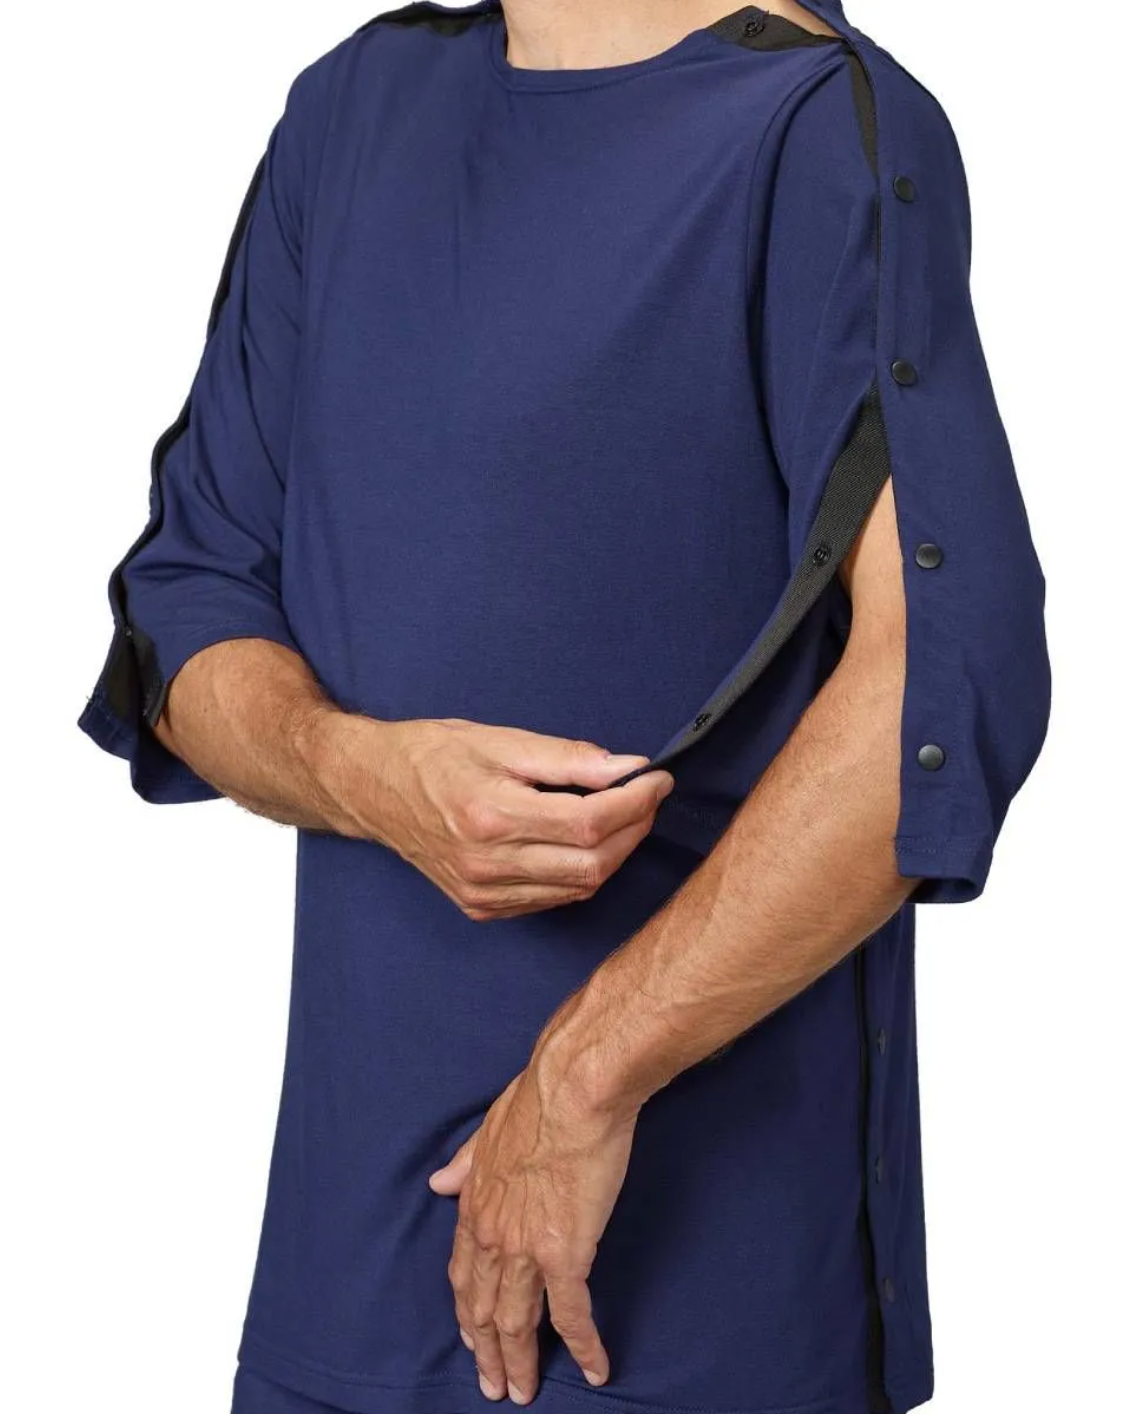 Post Surgery Clothing Top With Snaps | Art in Aging